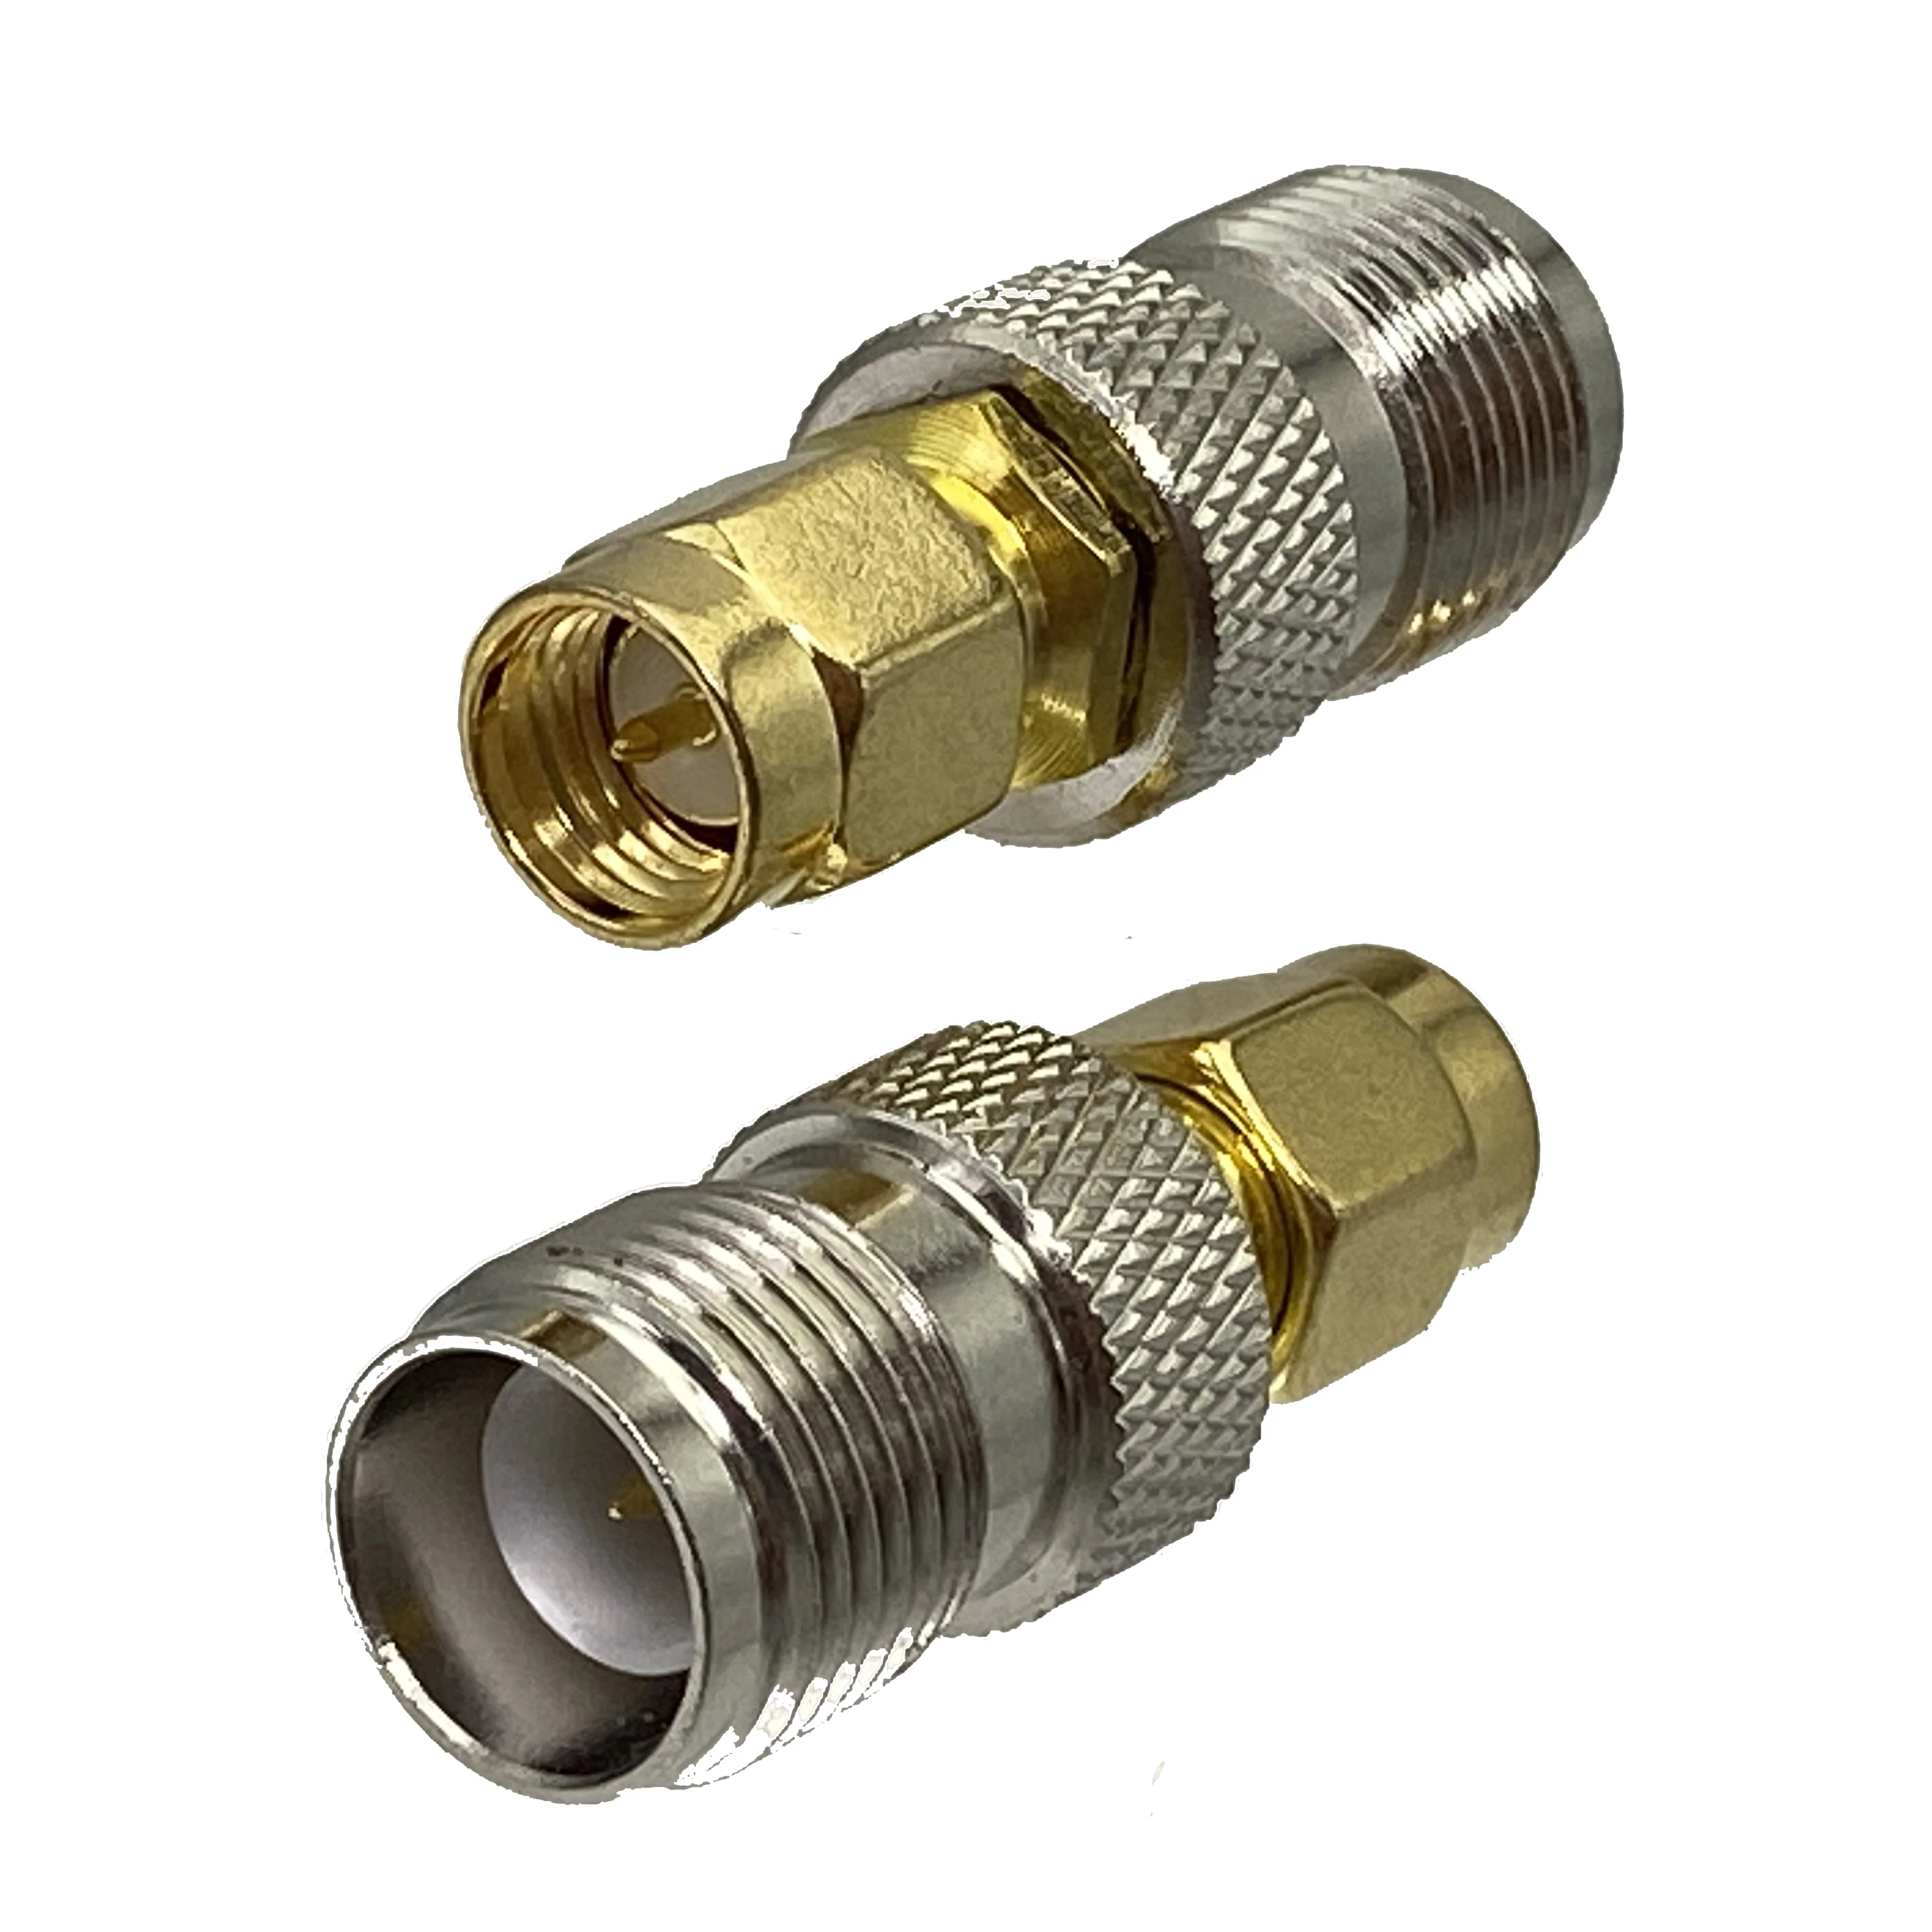 1pcs-connector-adapter-rp-tnc-female-plug-to-sma-male-plug-rf-coaxial-converter-straight-new